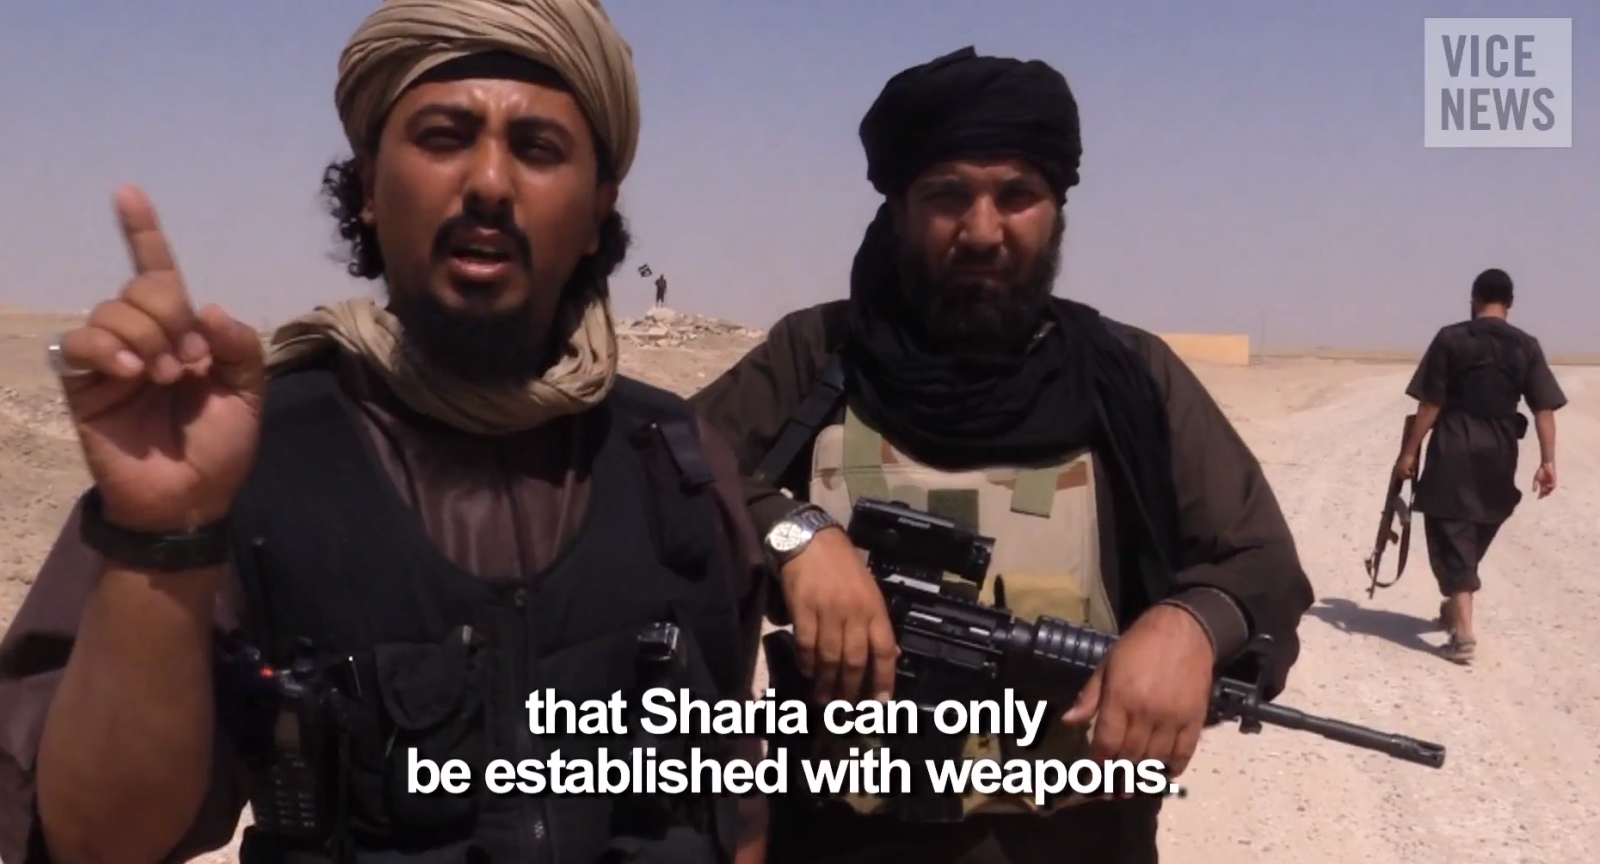 ISIS fighters [Photo Credit: Vice News]